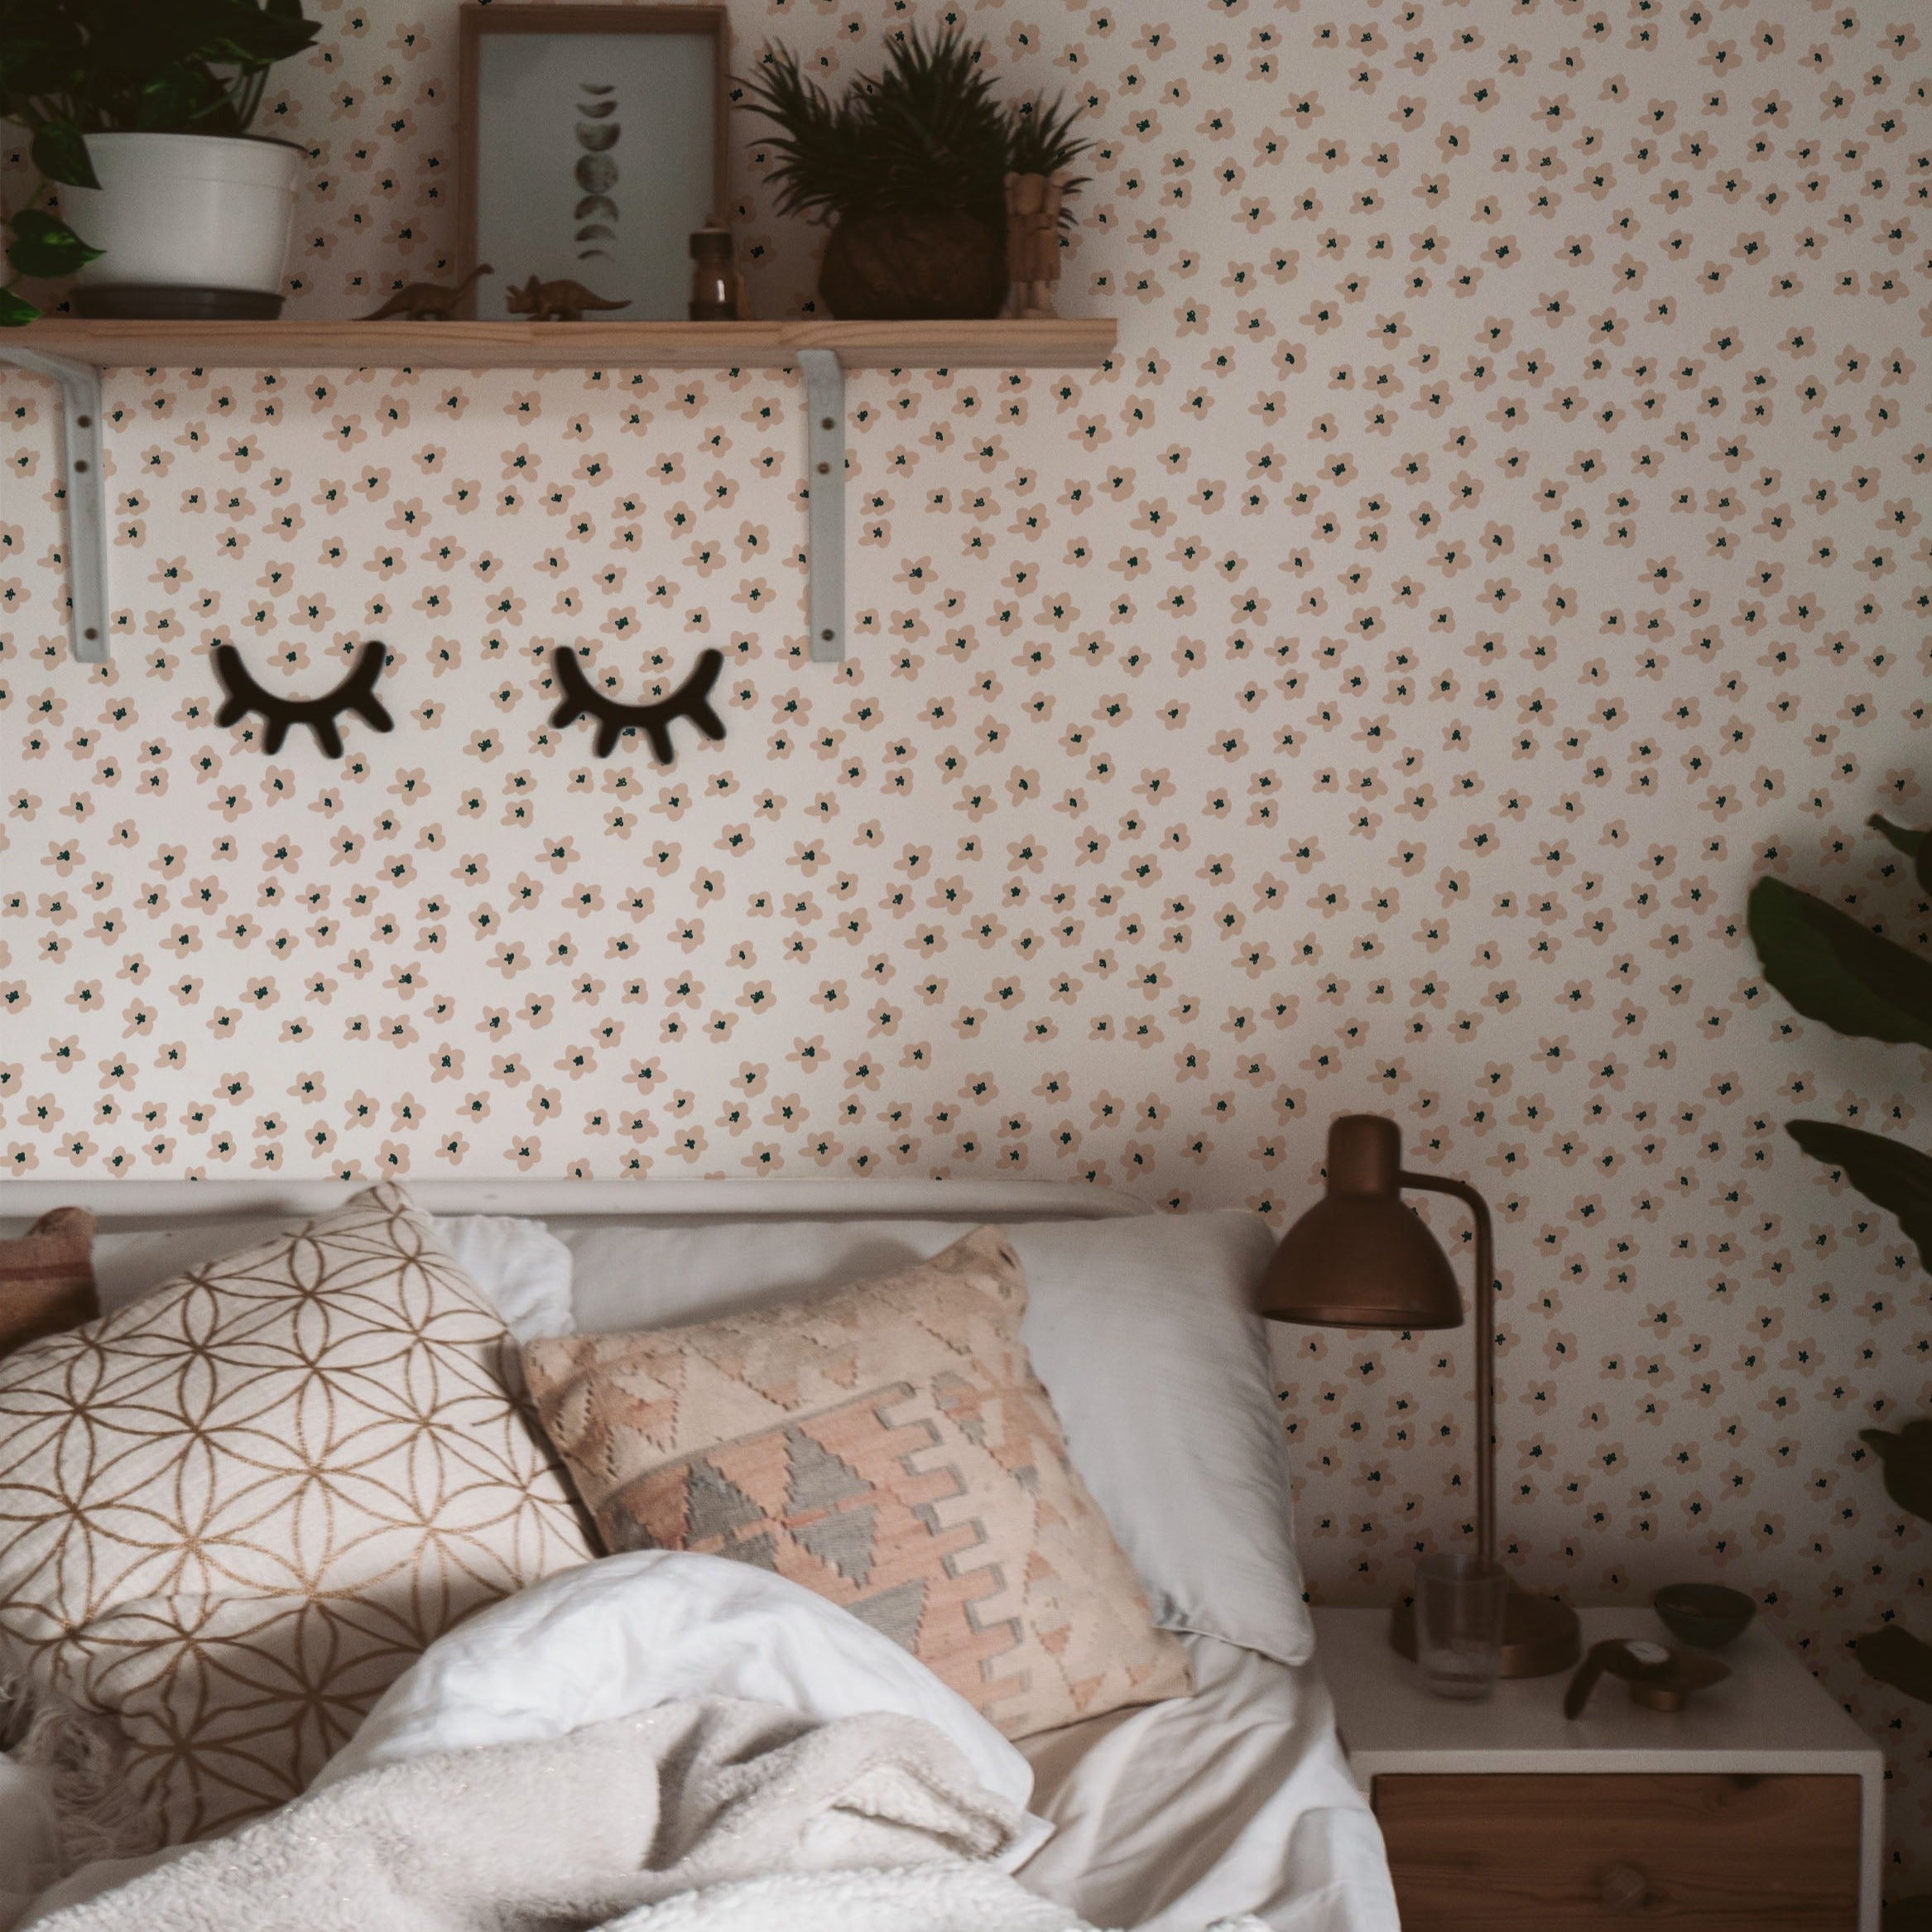 A warmly decorated corner of a bedroom with the Simple Meadow Wallpaper. This setup includes a shelf with decorative items, cozy pillows on the bed, and a small nightstand with a lamp, all complemented by the floral backdrop.